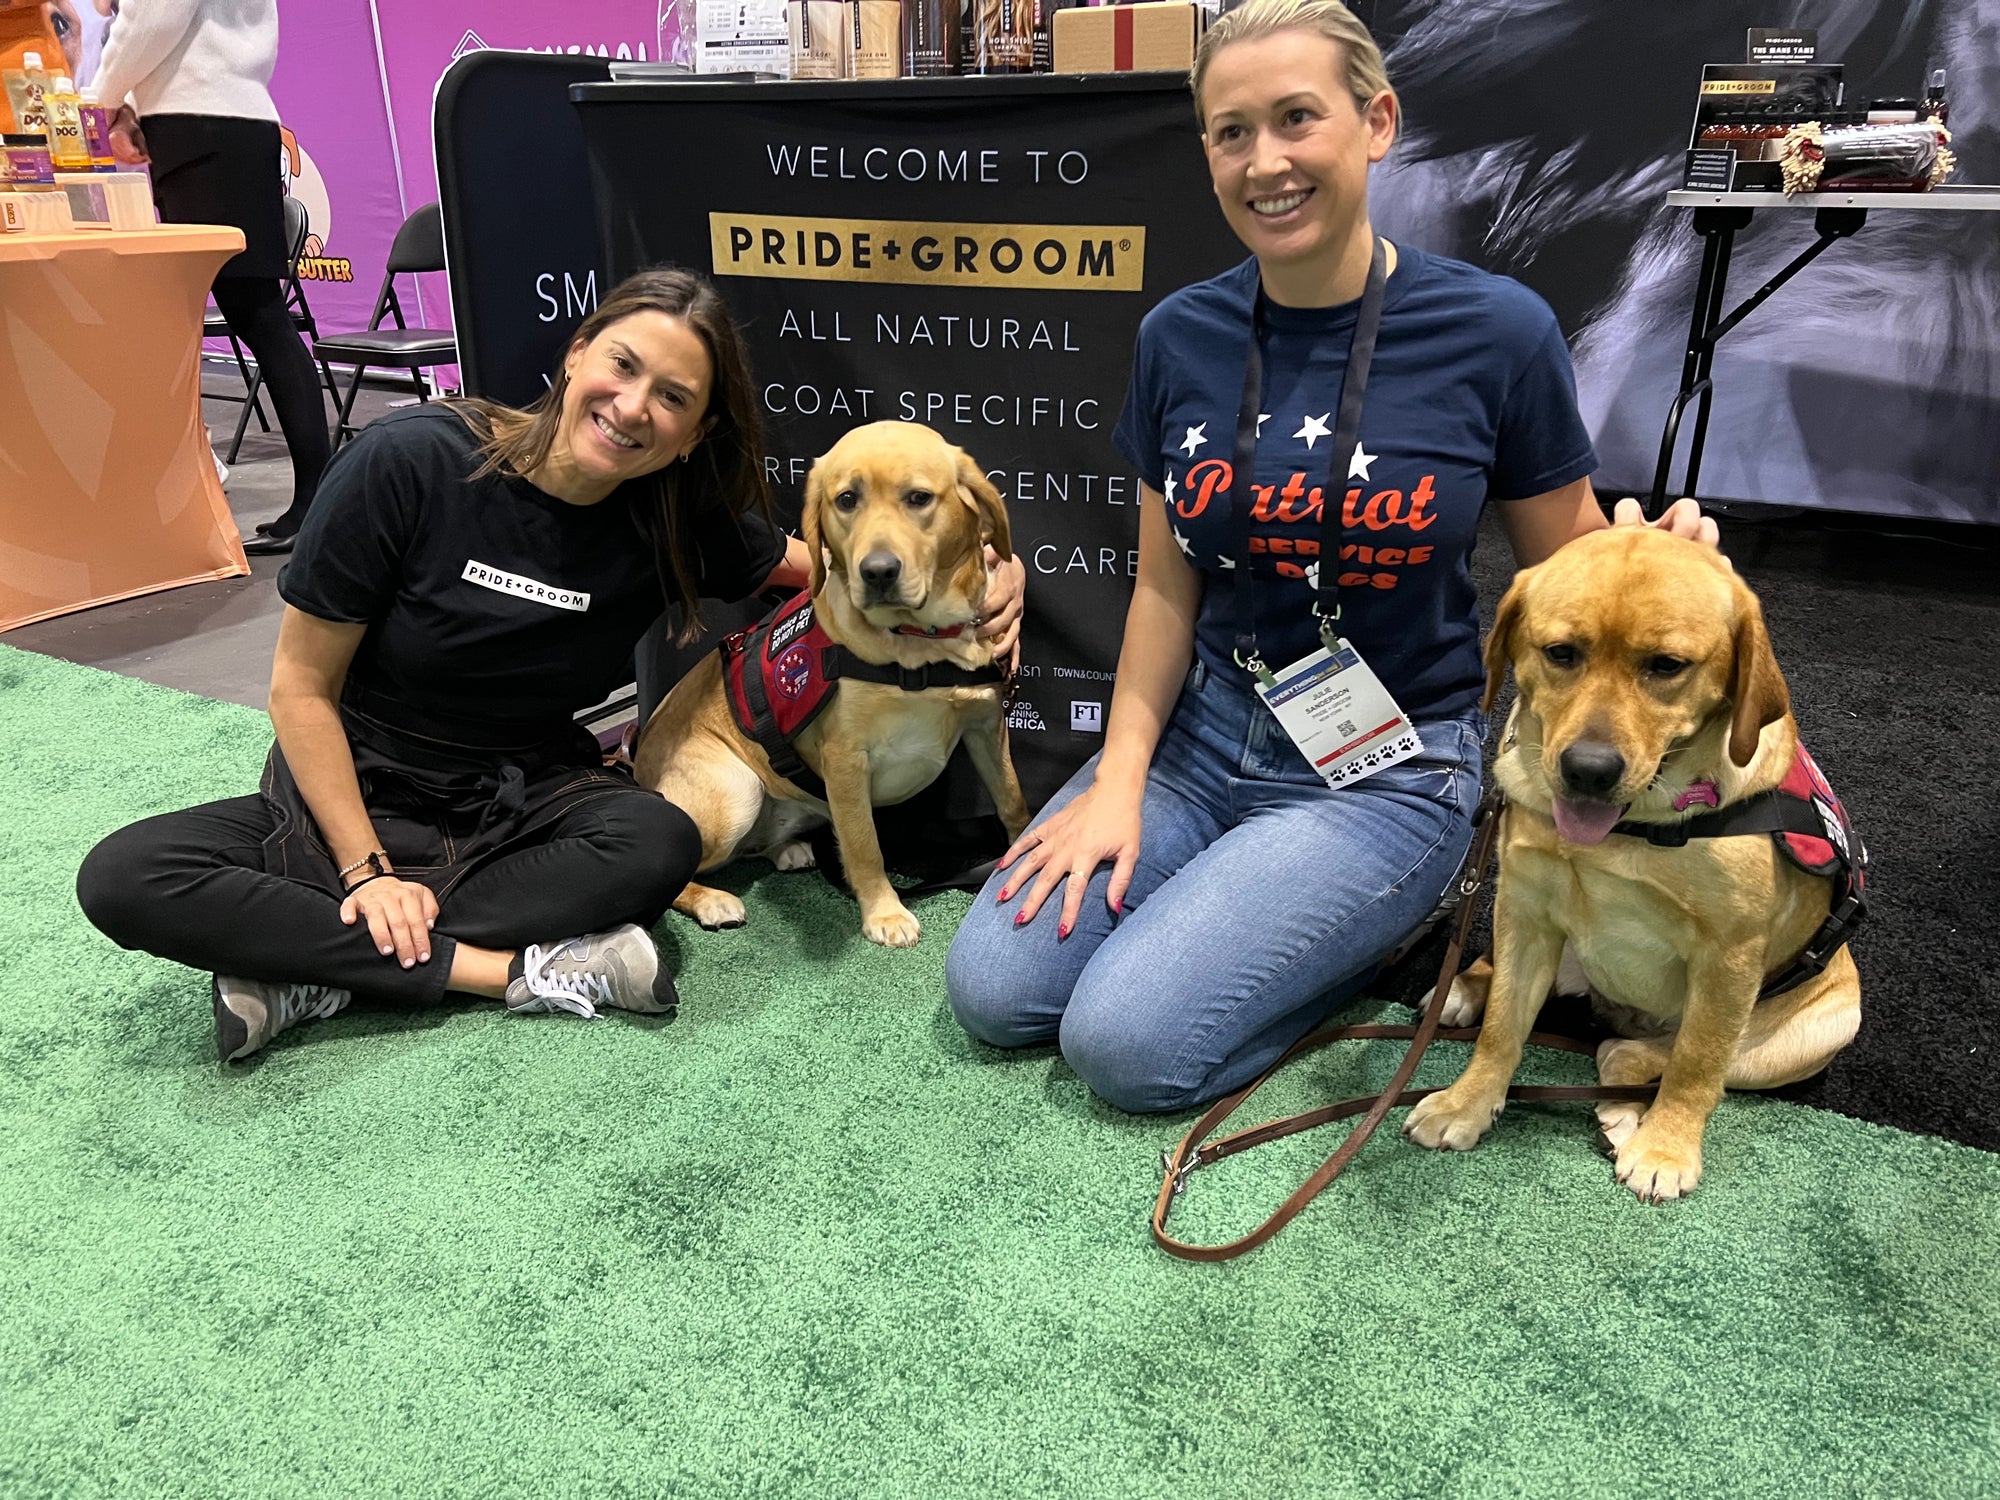 Blog posts Global Pet Expo 2023: Highlights from the Show by PRIDE+GROOM